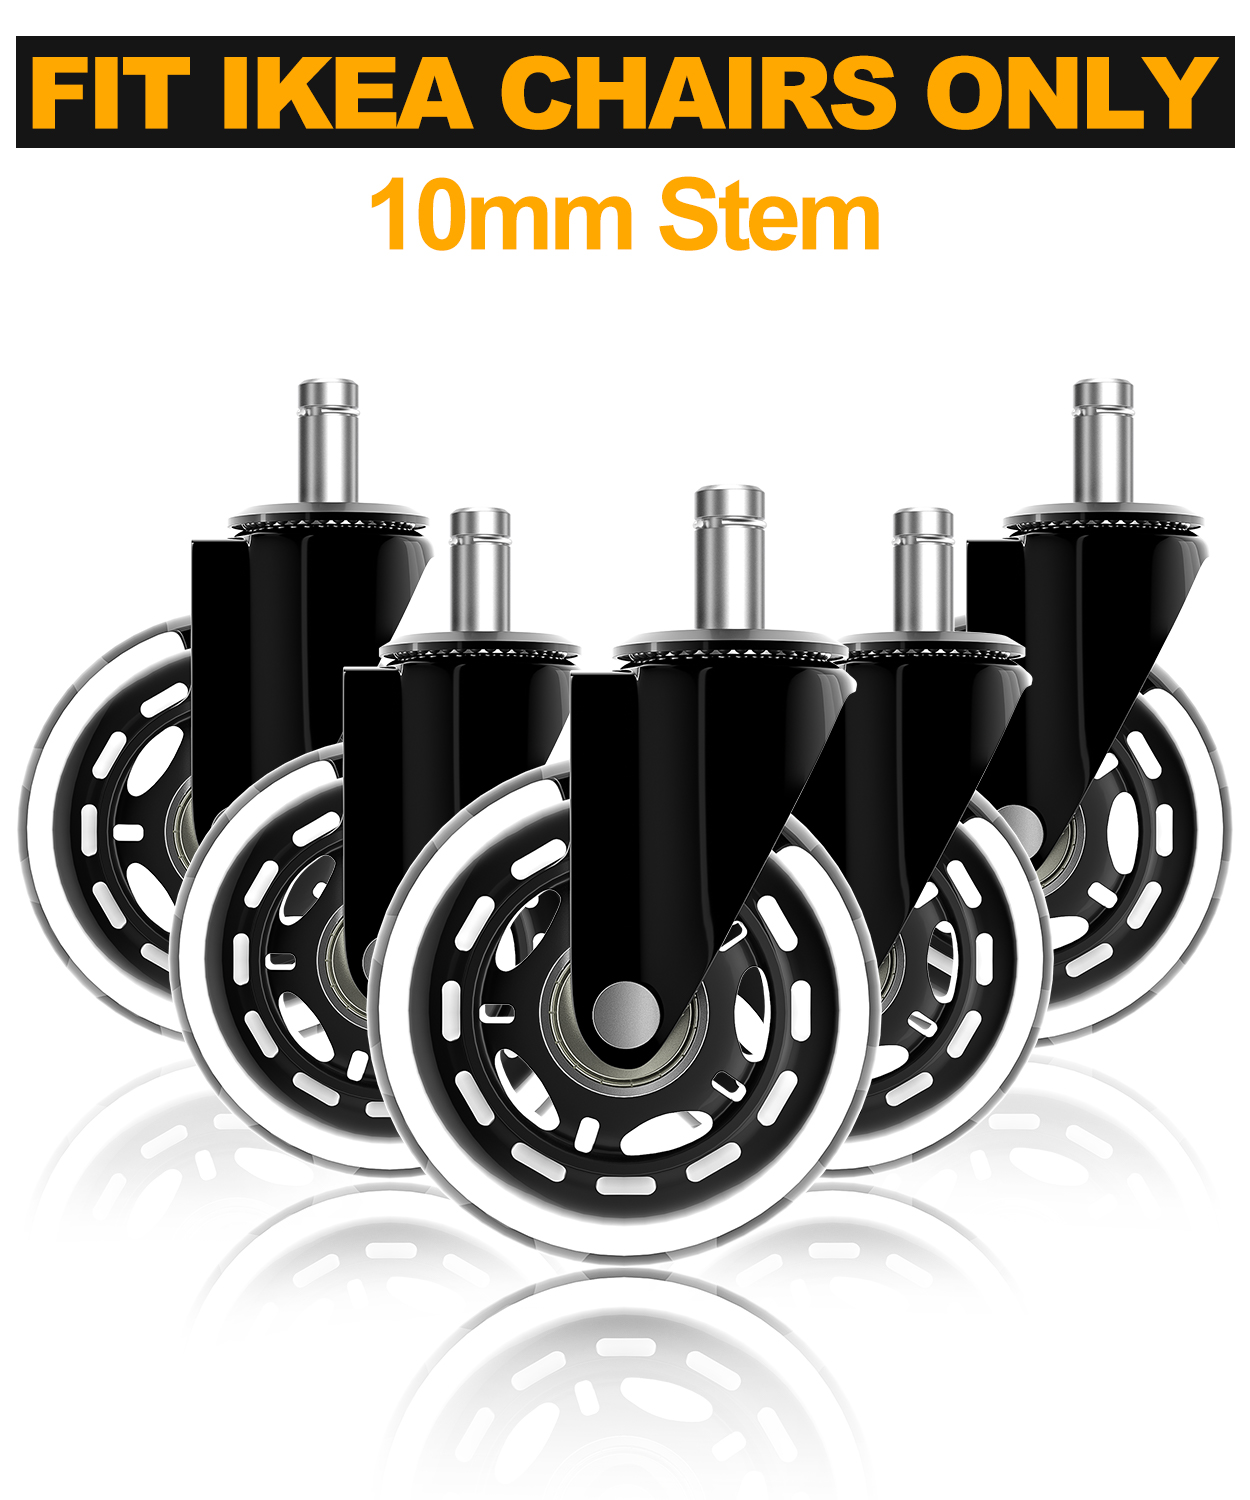 Office Chair Wheels for IKEA Chair Only with 10mm Stem, Heavy Duty Rubber Caster Wheels Roll Smooth, 5 Pack Wheels with 3/8